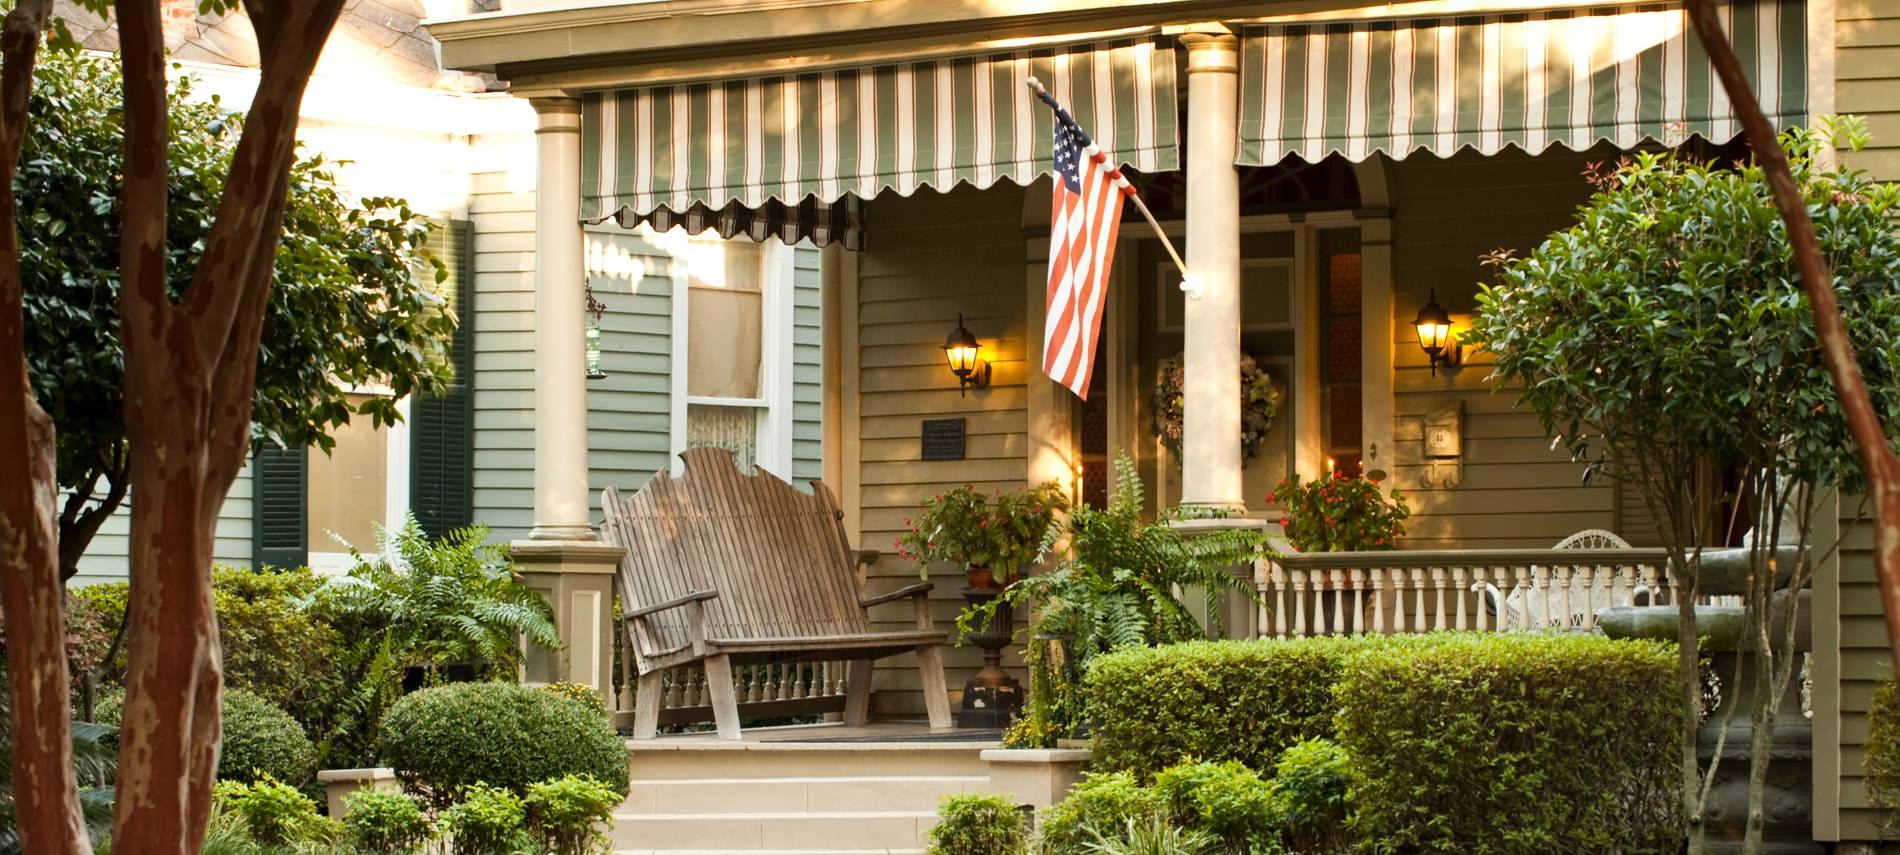 View of front porch covered in ferns and greenery, a rustic bench and furniture, and tan house siding